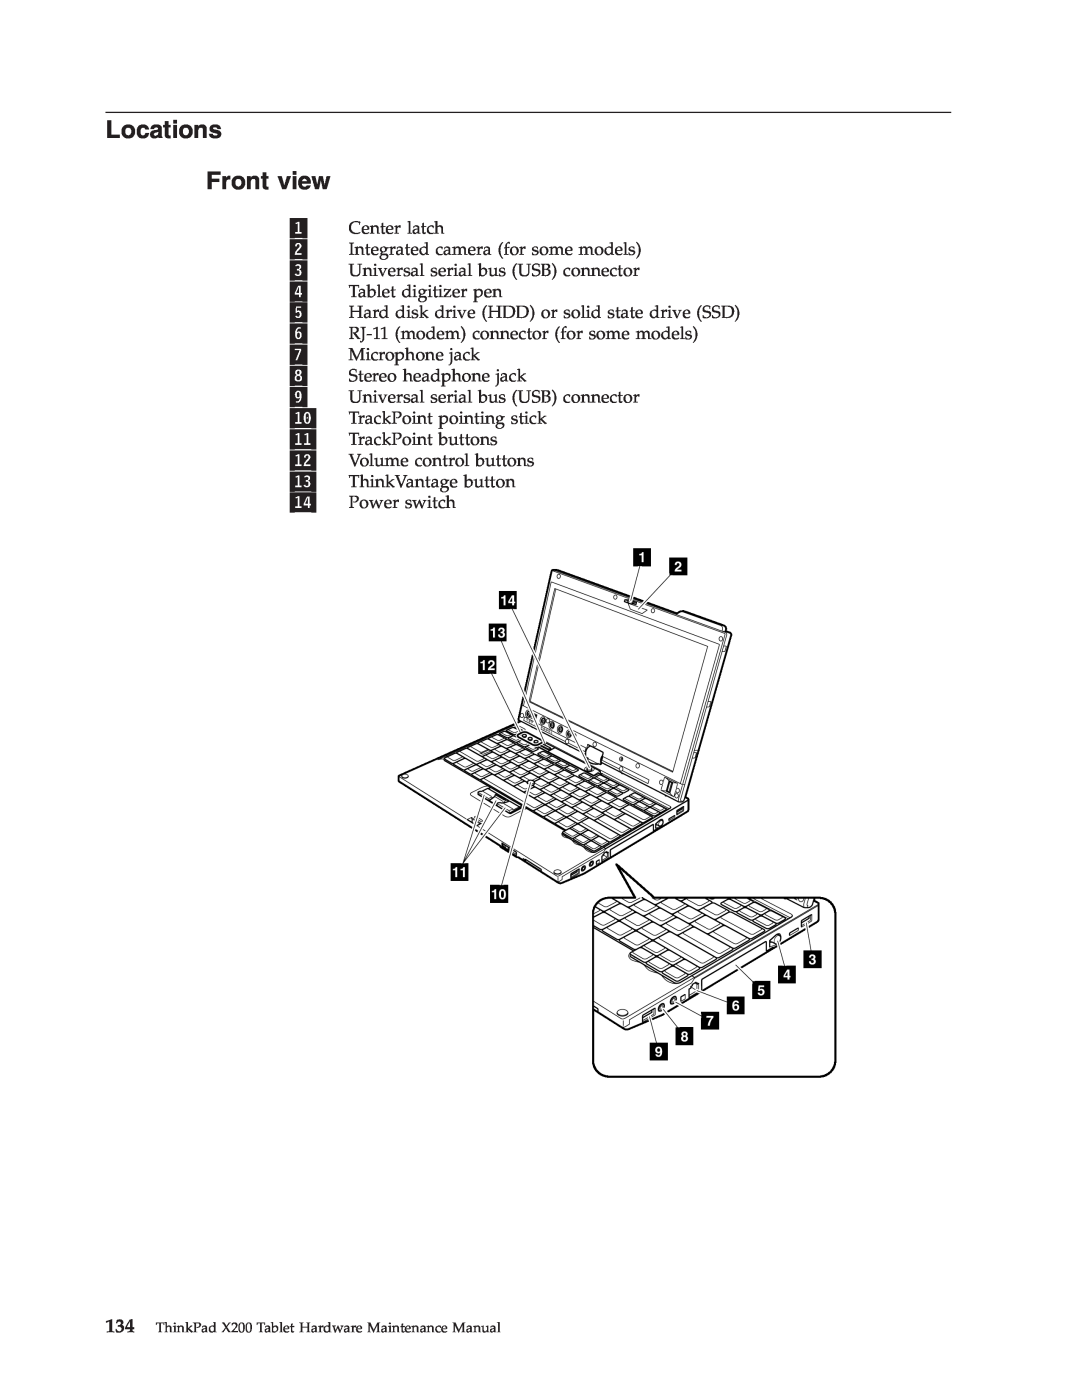 Lenovo X200 manual Locations Front view 